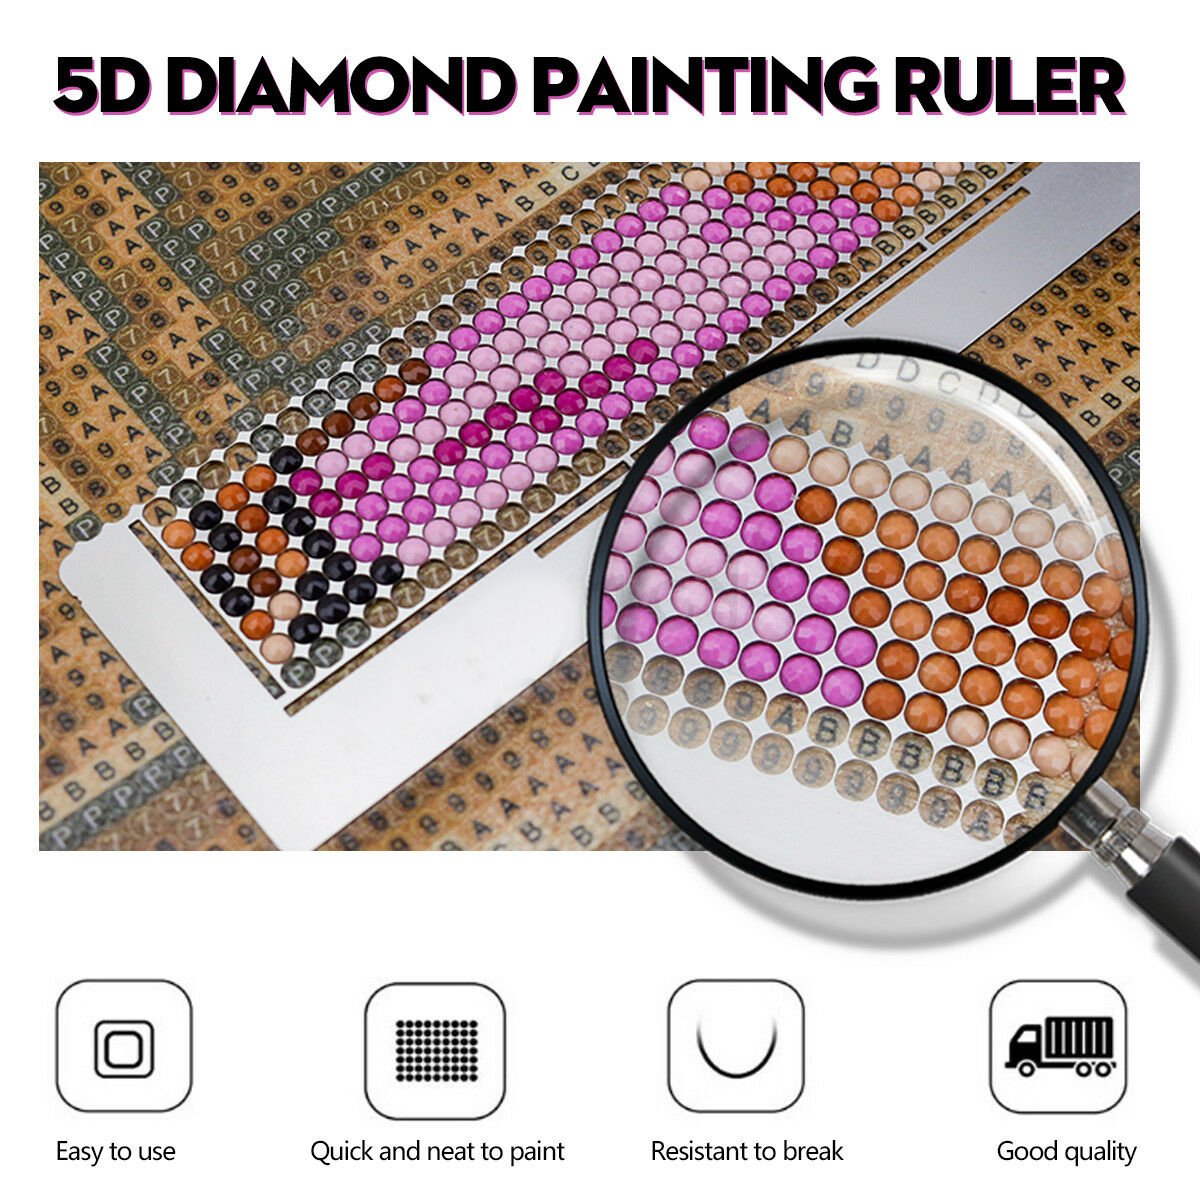 5D Diamond Painting Ruler Stainless Steel Blank Grids Round Tool For